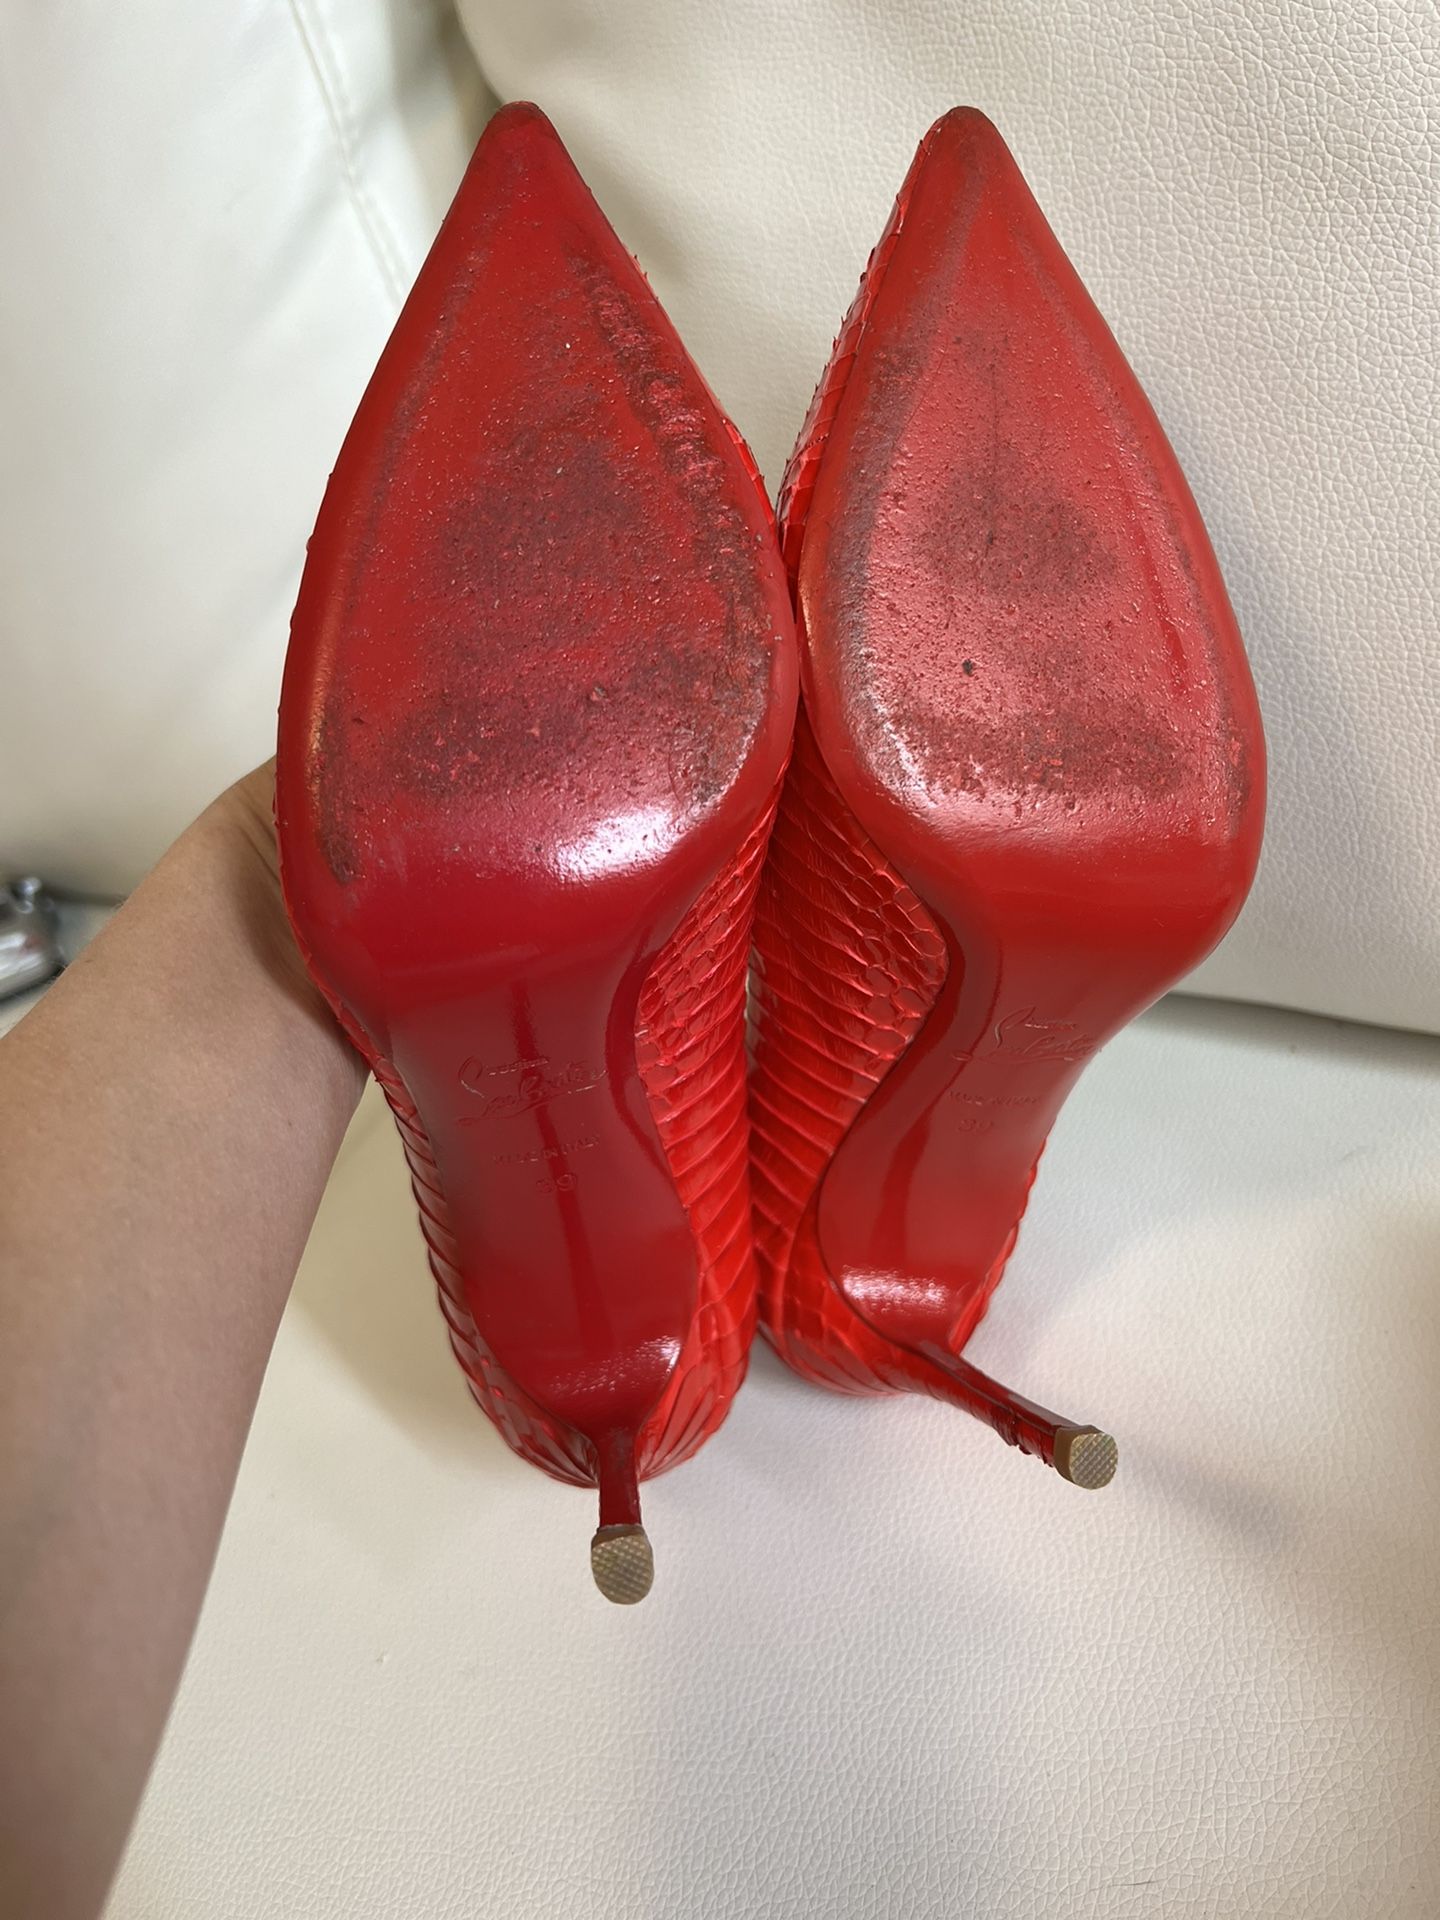 Christian Louboutin So Kate Heels for Sale in North Bergen, NJ - OfferUp